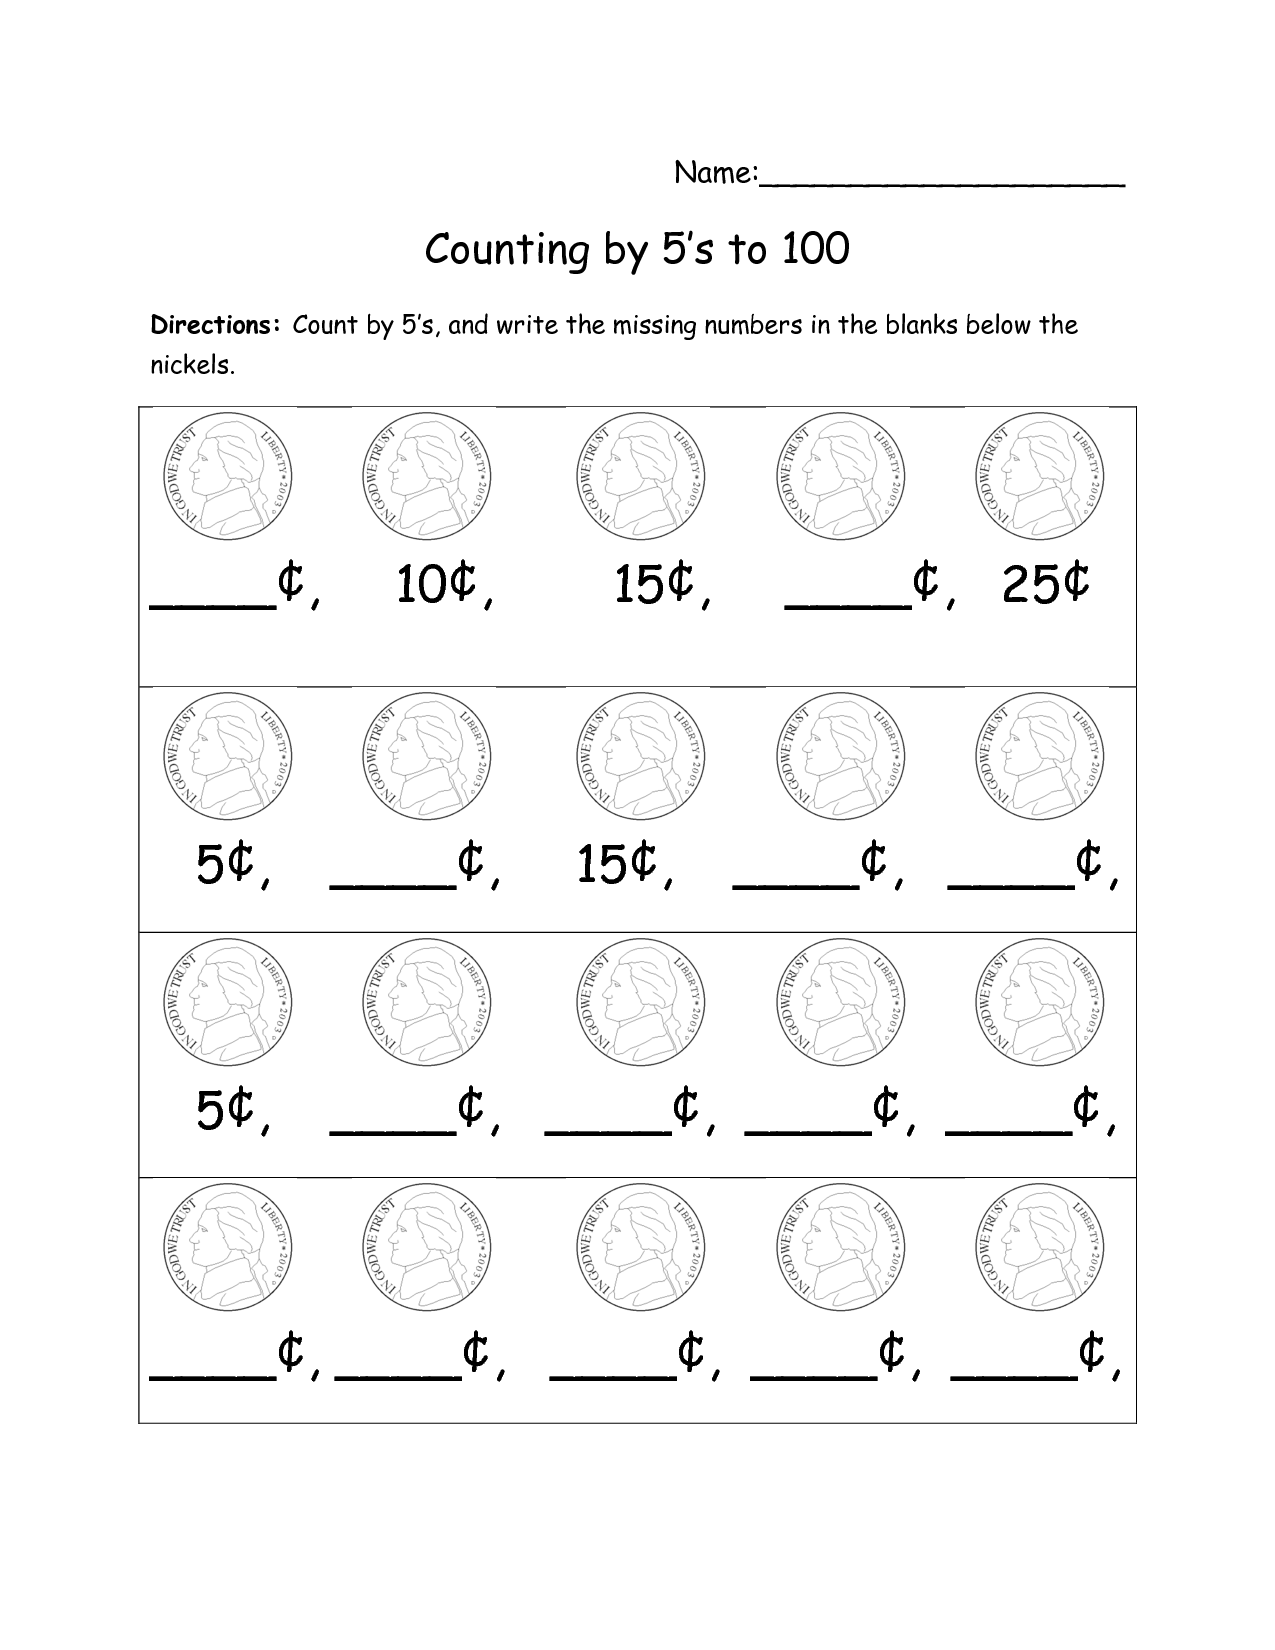 17-best-images-of-home-school-worksheets-physical-education-record